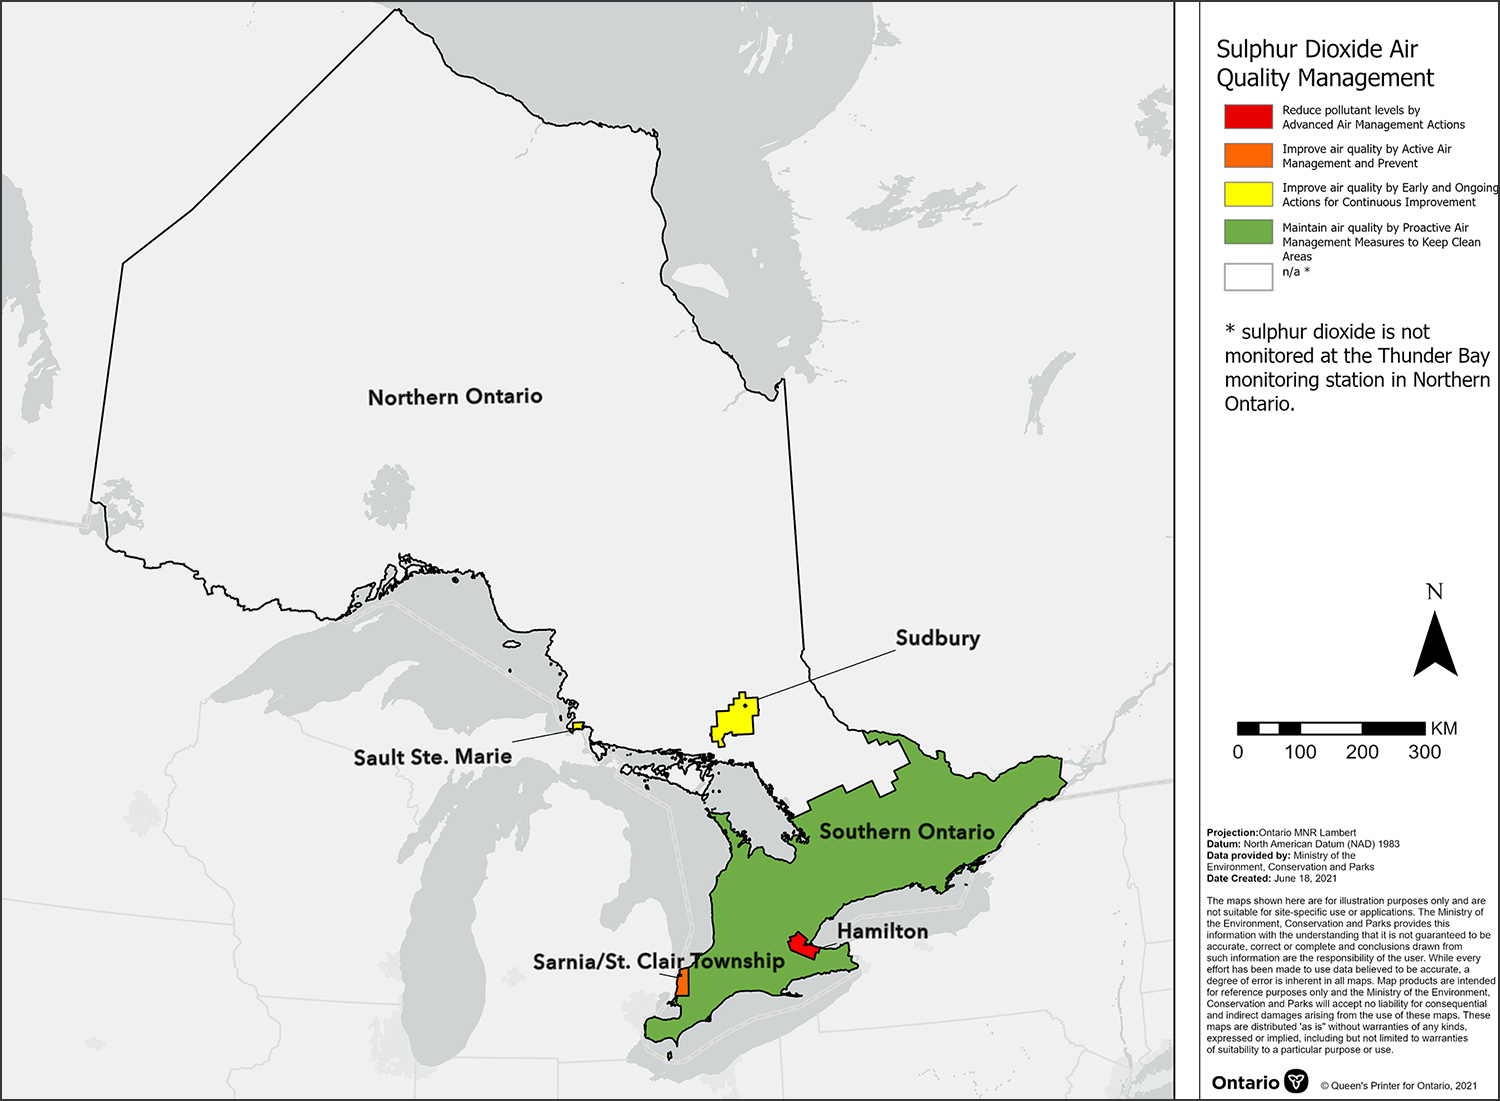 Map showing the sulphur dioxide Canadian Ambient Air Quality Standard management levels for air zones across